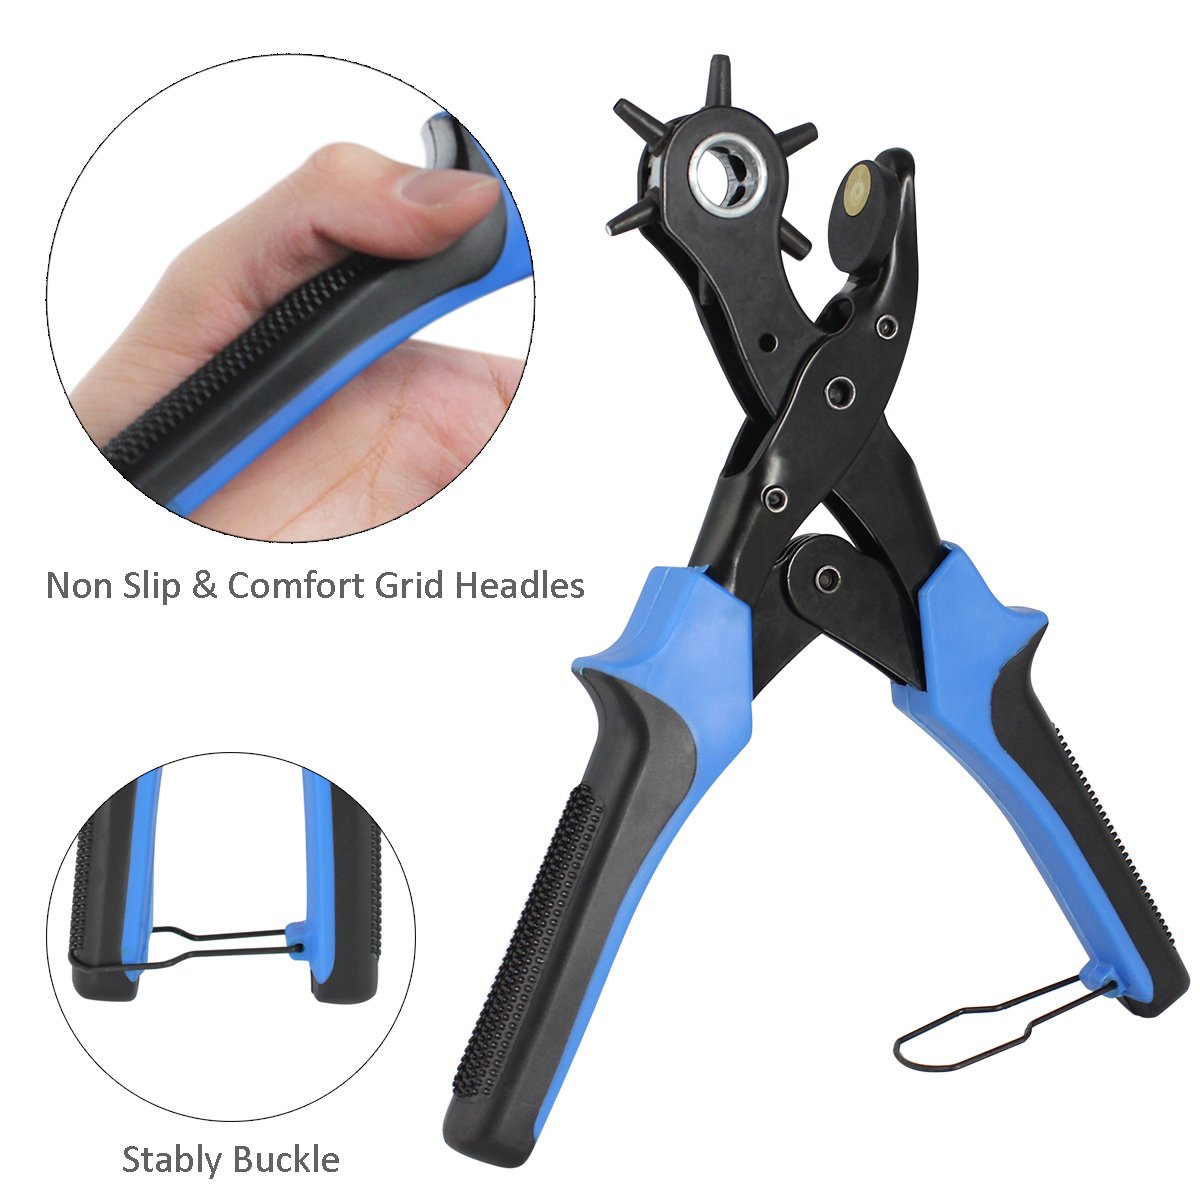 Heavy Duty Leather Hole Punch Tool Multi Size Plier with Compound Joint and  Ergonomic Grip for Belt Collar Strap Fabric Eyelet - $12.59 - JacobsParts  Inc